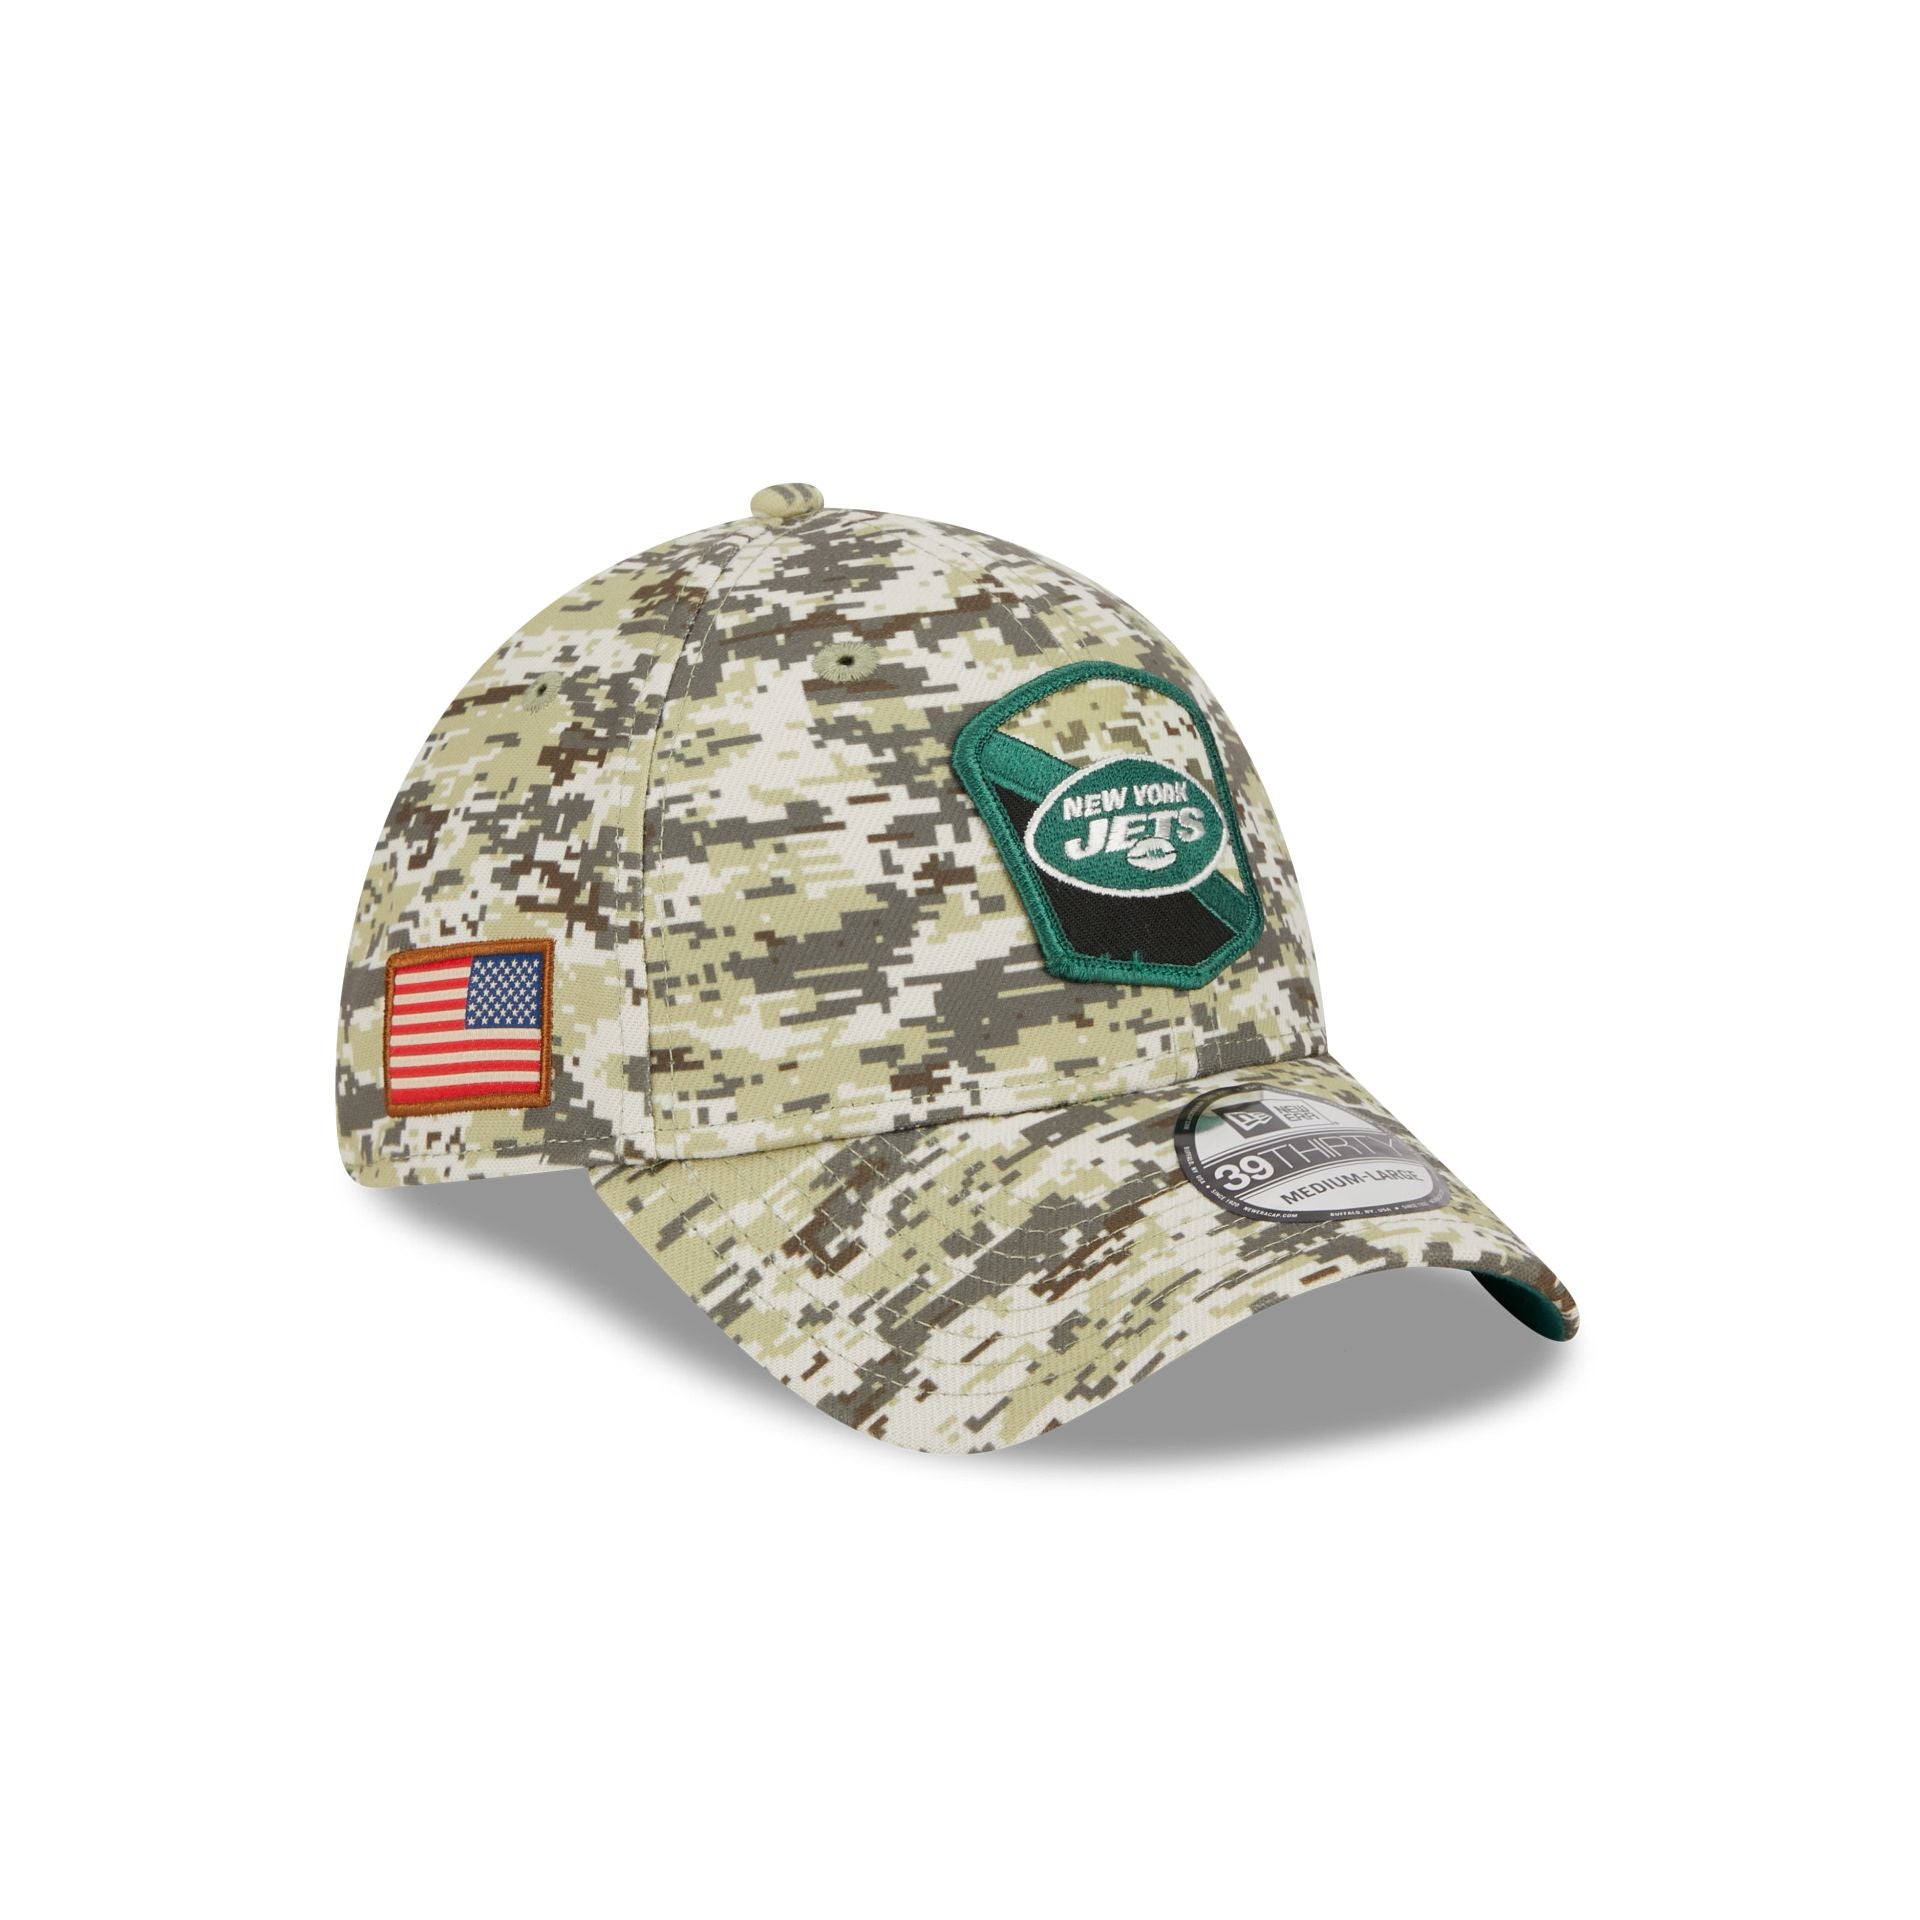 St Louis Rams NFL TEAM-BASIC Army Camo Fitted Hat by New Era